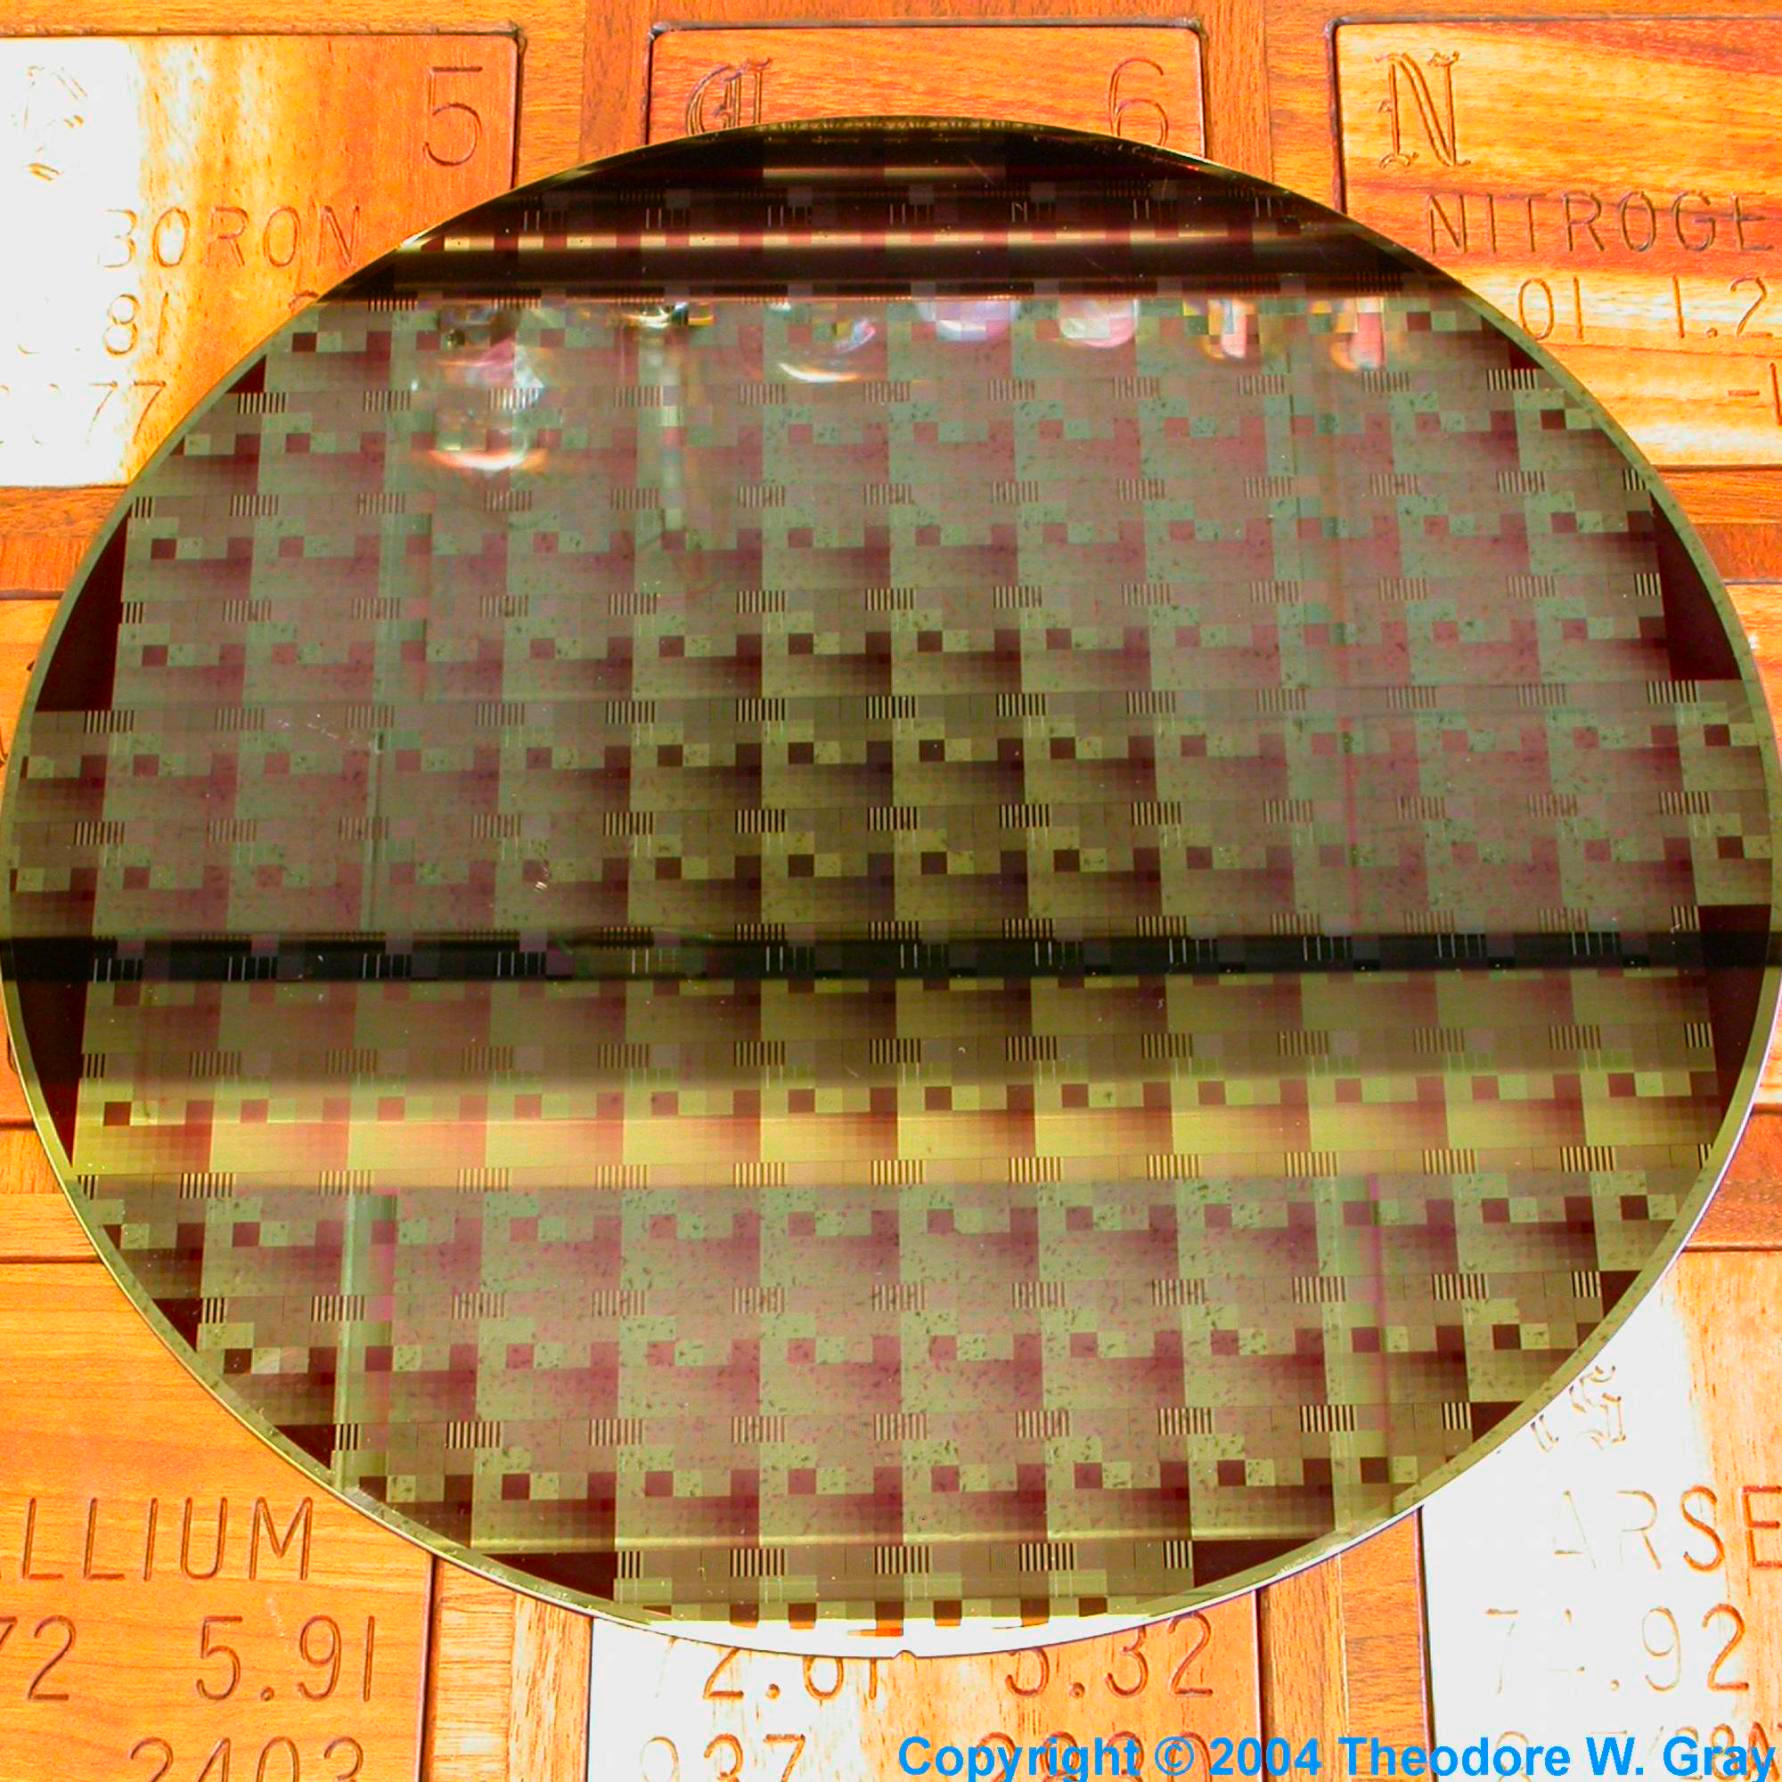 Silicon 12 Wafer